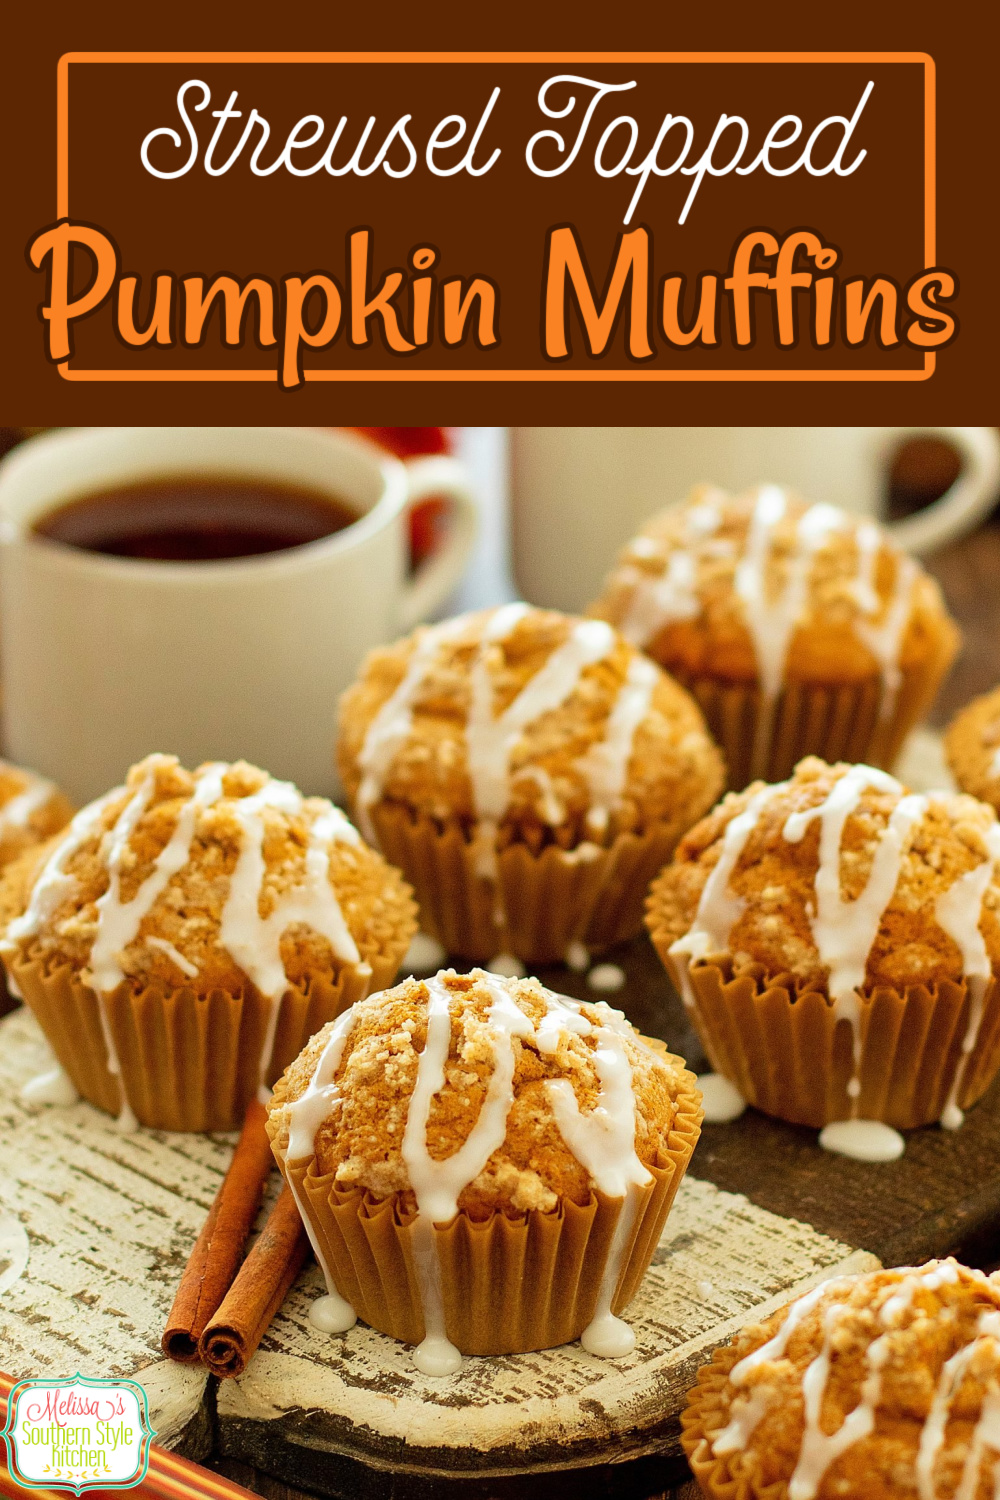 Enjoy these Pumpkin Muffins with Streusel Topping with a cup of Joe or hot tea #pumpkinmuffins #pumpkinrecipes #pumpkindesserts #easymuffins #muffinrecipes #easypumpkinrecipes #streuselmuffins #pumpkin via @melissasssk